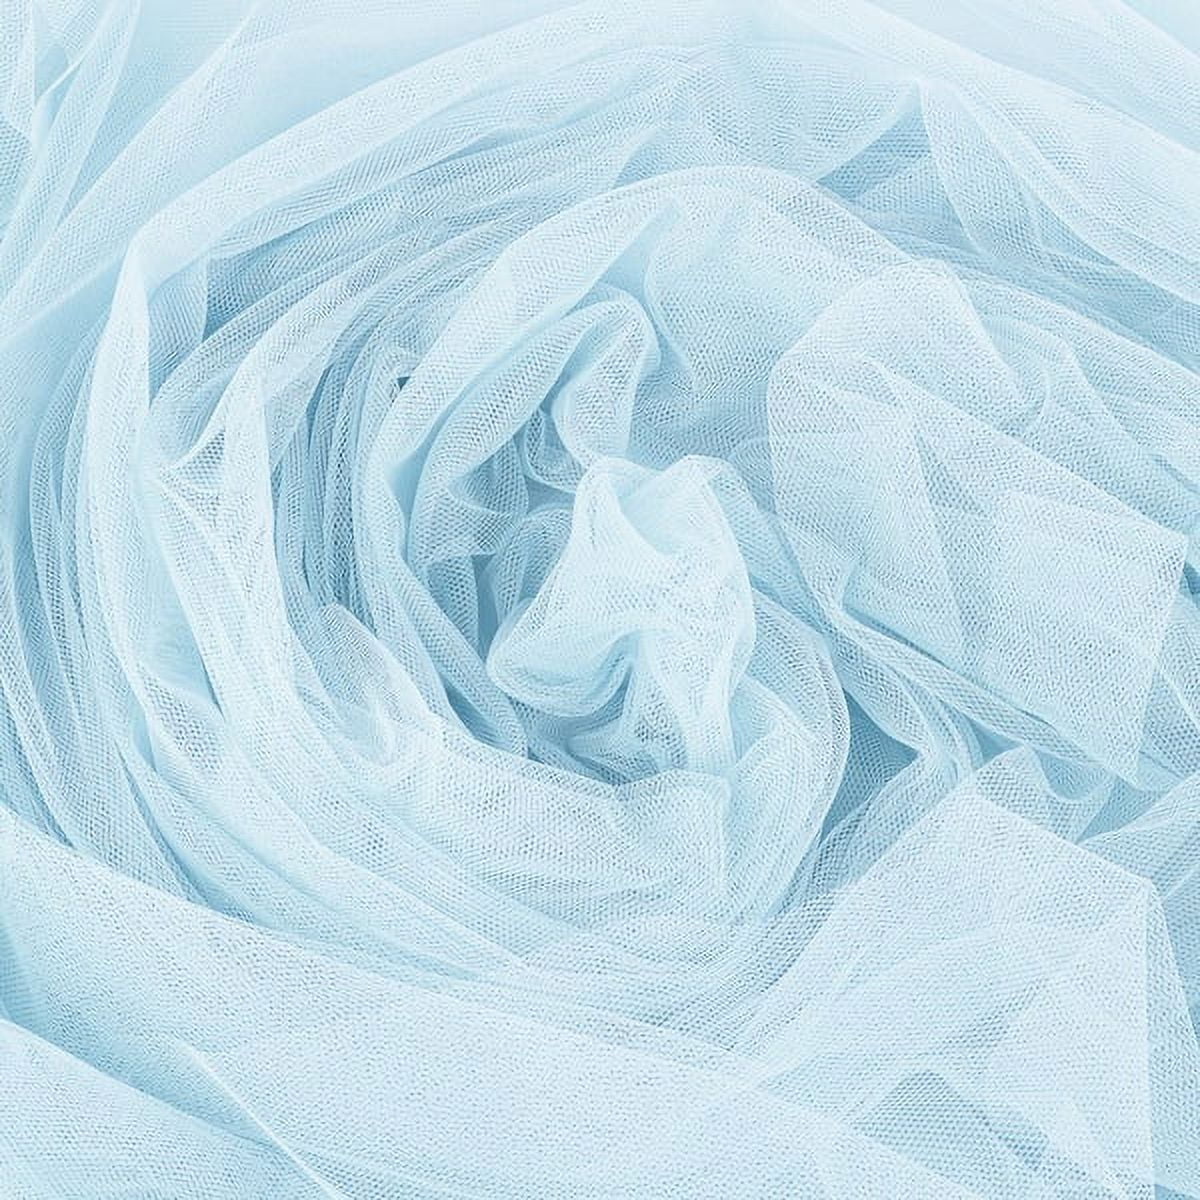 1 Pc, Soft Tulle Fabric Roll 54 x 40 Yds - Dusty Blue for Wedding, Baby  Shower, Anniversary, or Birthday Party